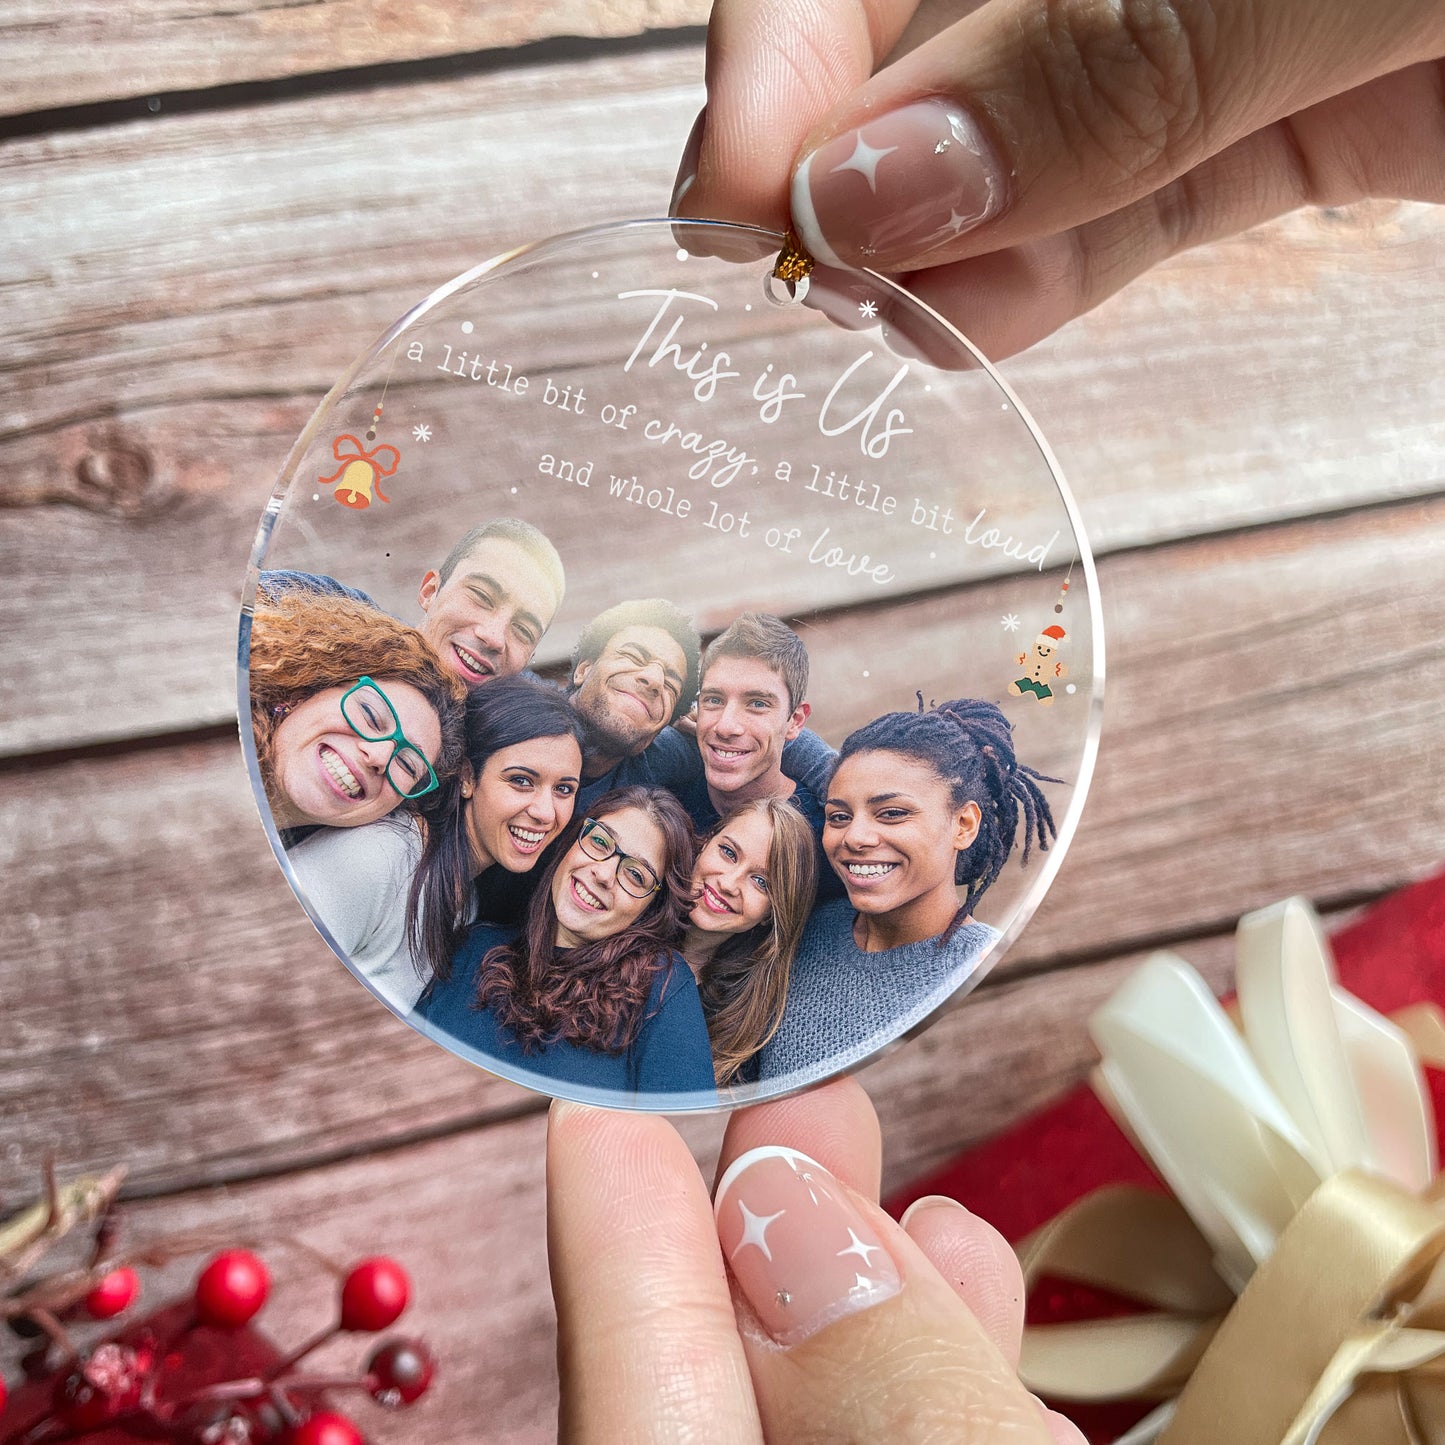 This Is Us A Little Bit Of Crazy - Personalized Acrylic Photo Ornament